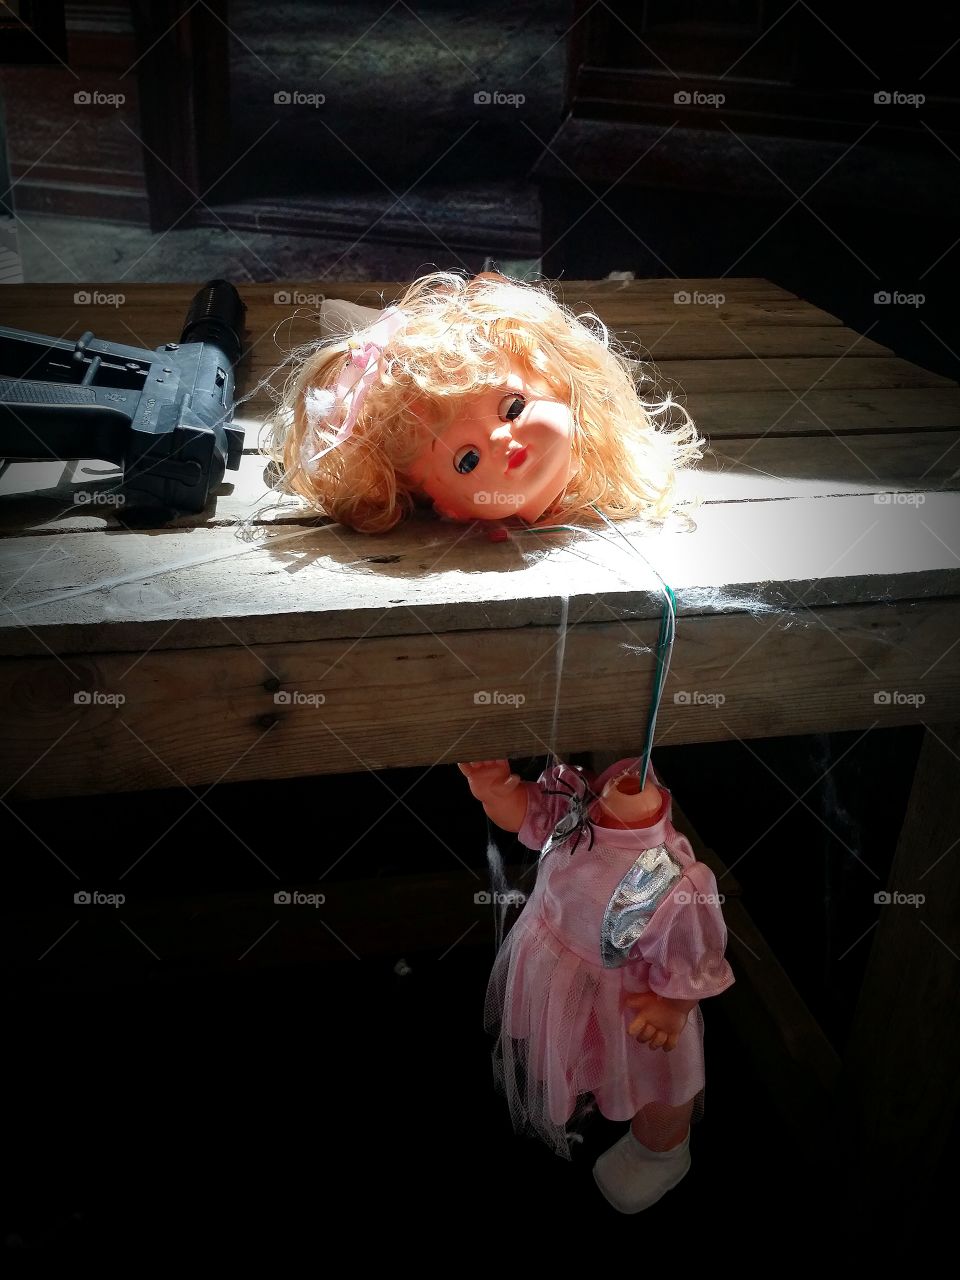 Woman decapitated dolls were placed on a wooden table with a machine gun on Halloween.